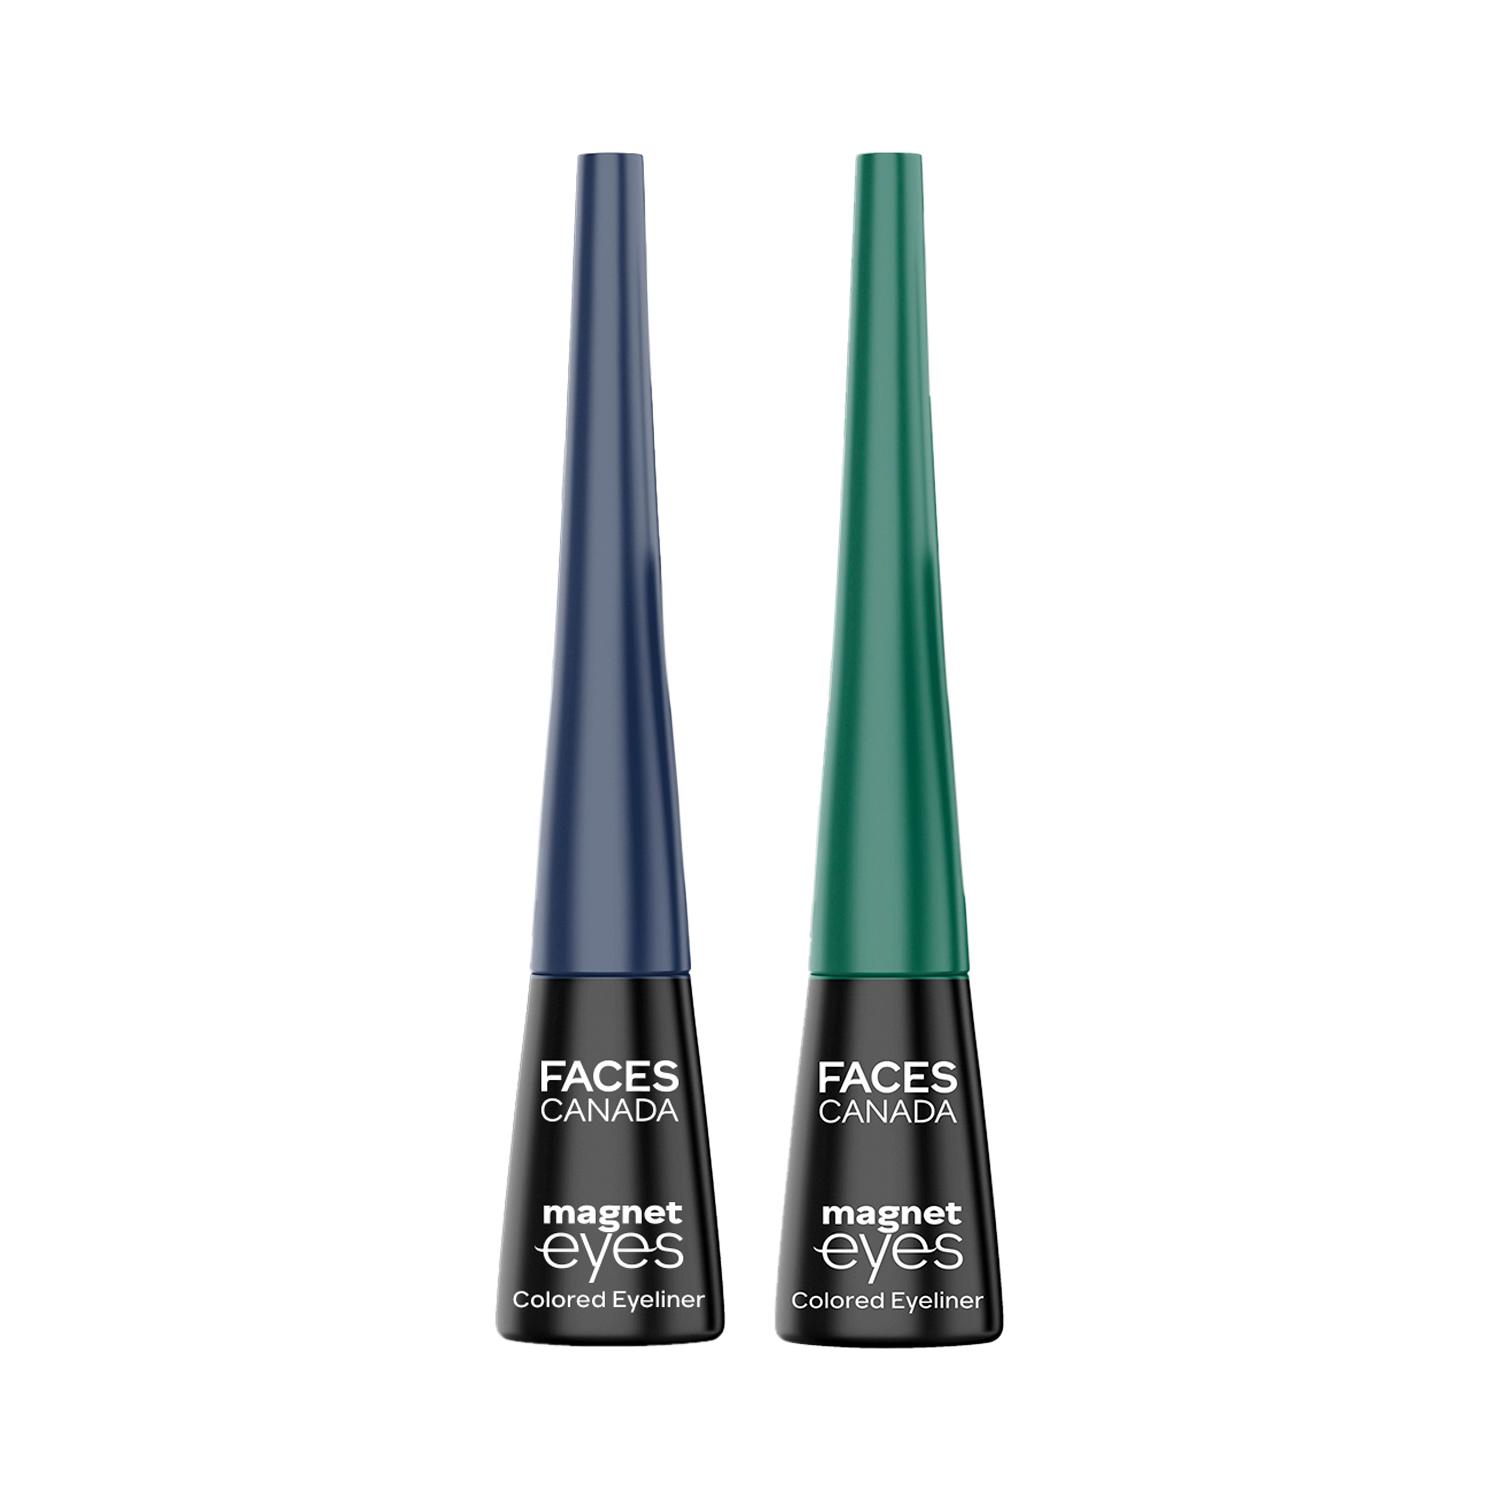 Faces Canada | Faces Canada Magneteyes Color Eyeliners Pack of 2 Elegant Green and Dazzling Blue (4ml x 2) Combo